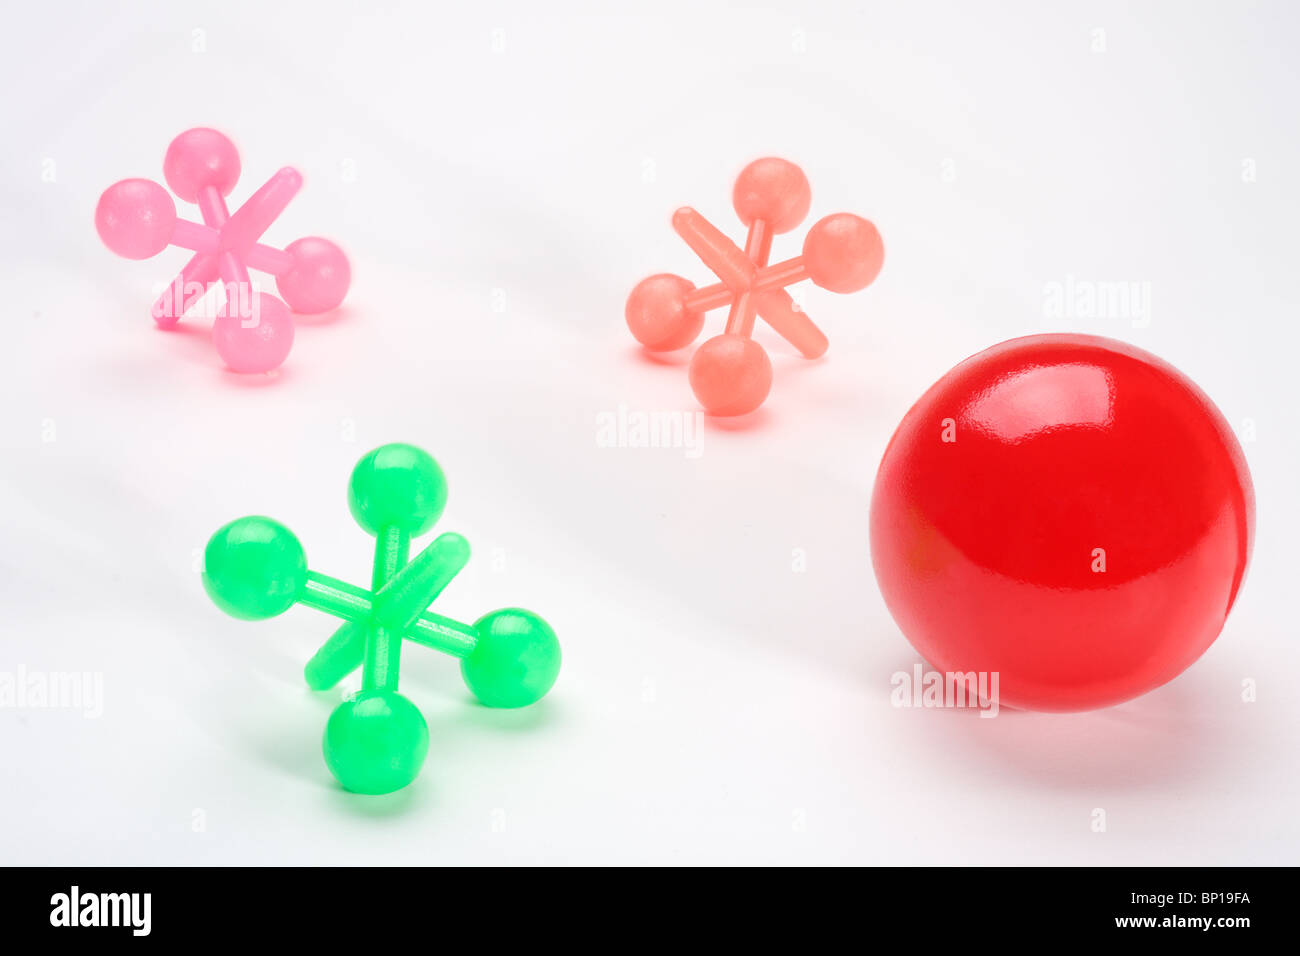 Plastic jacks and red ball Stock Photo